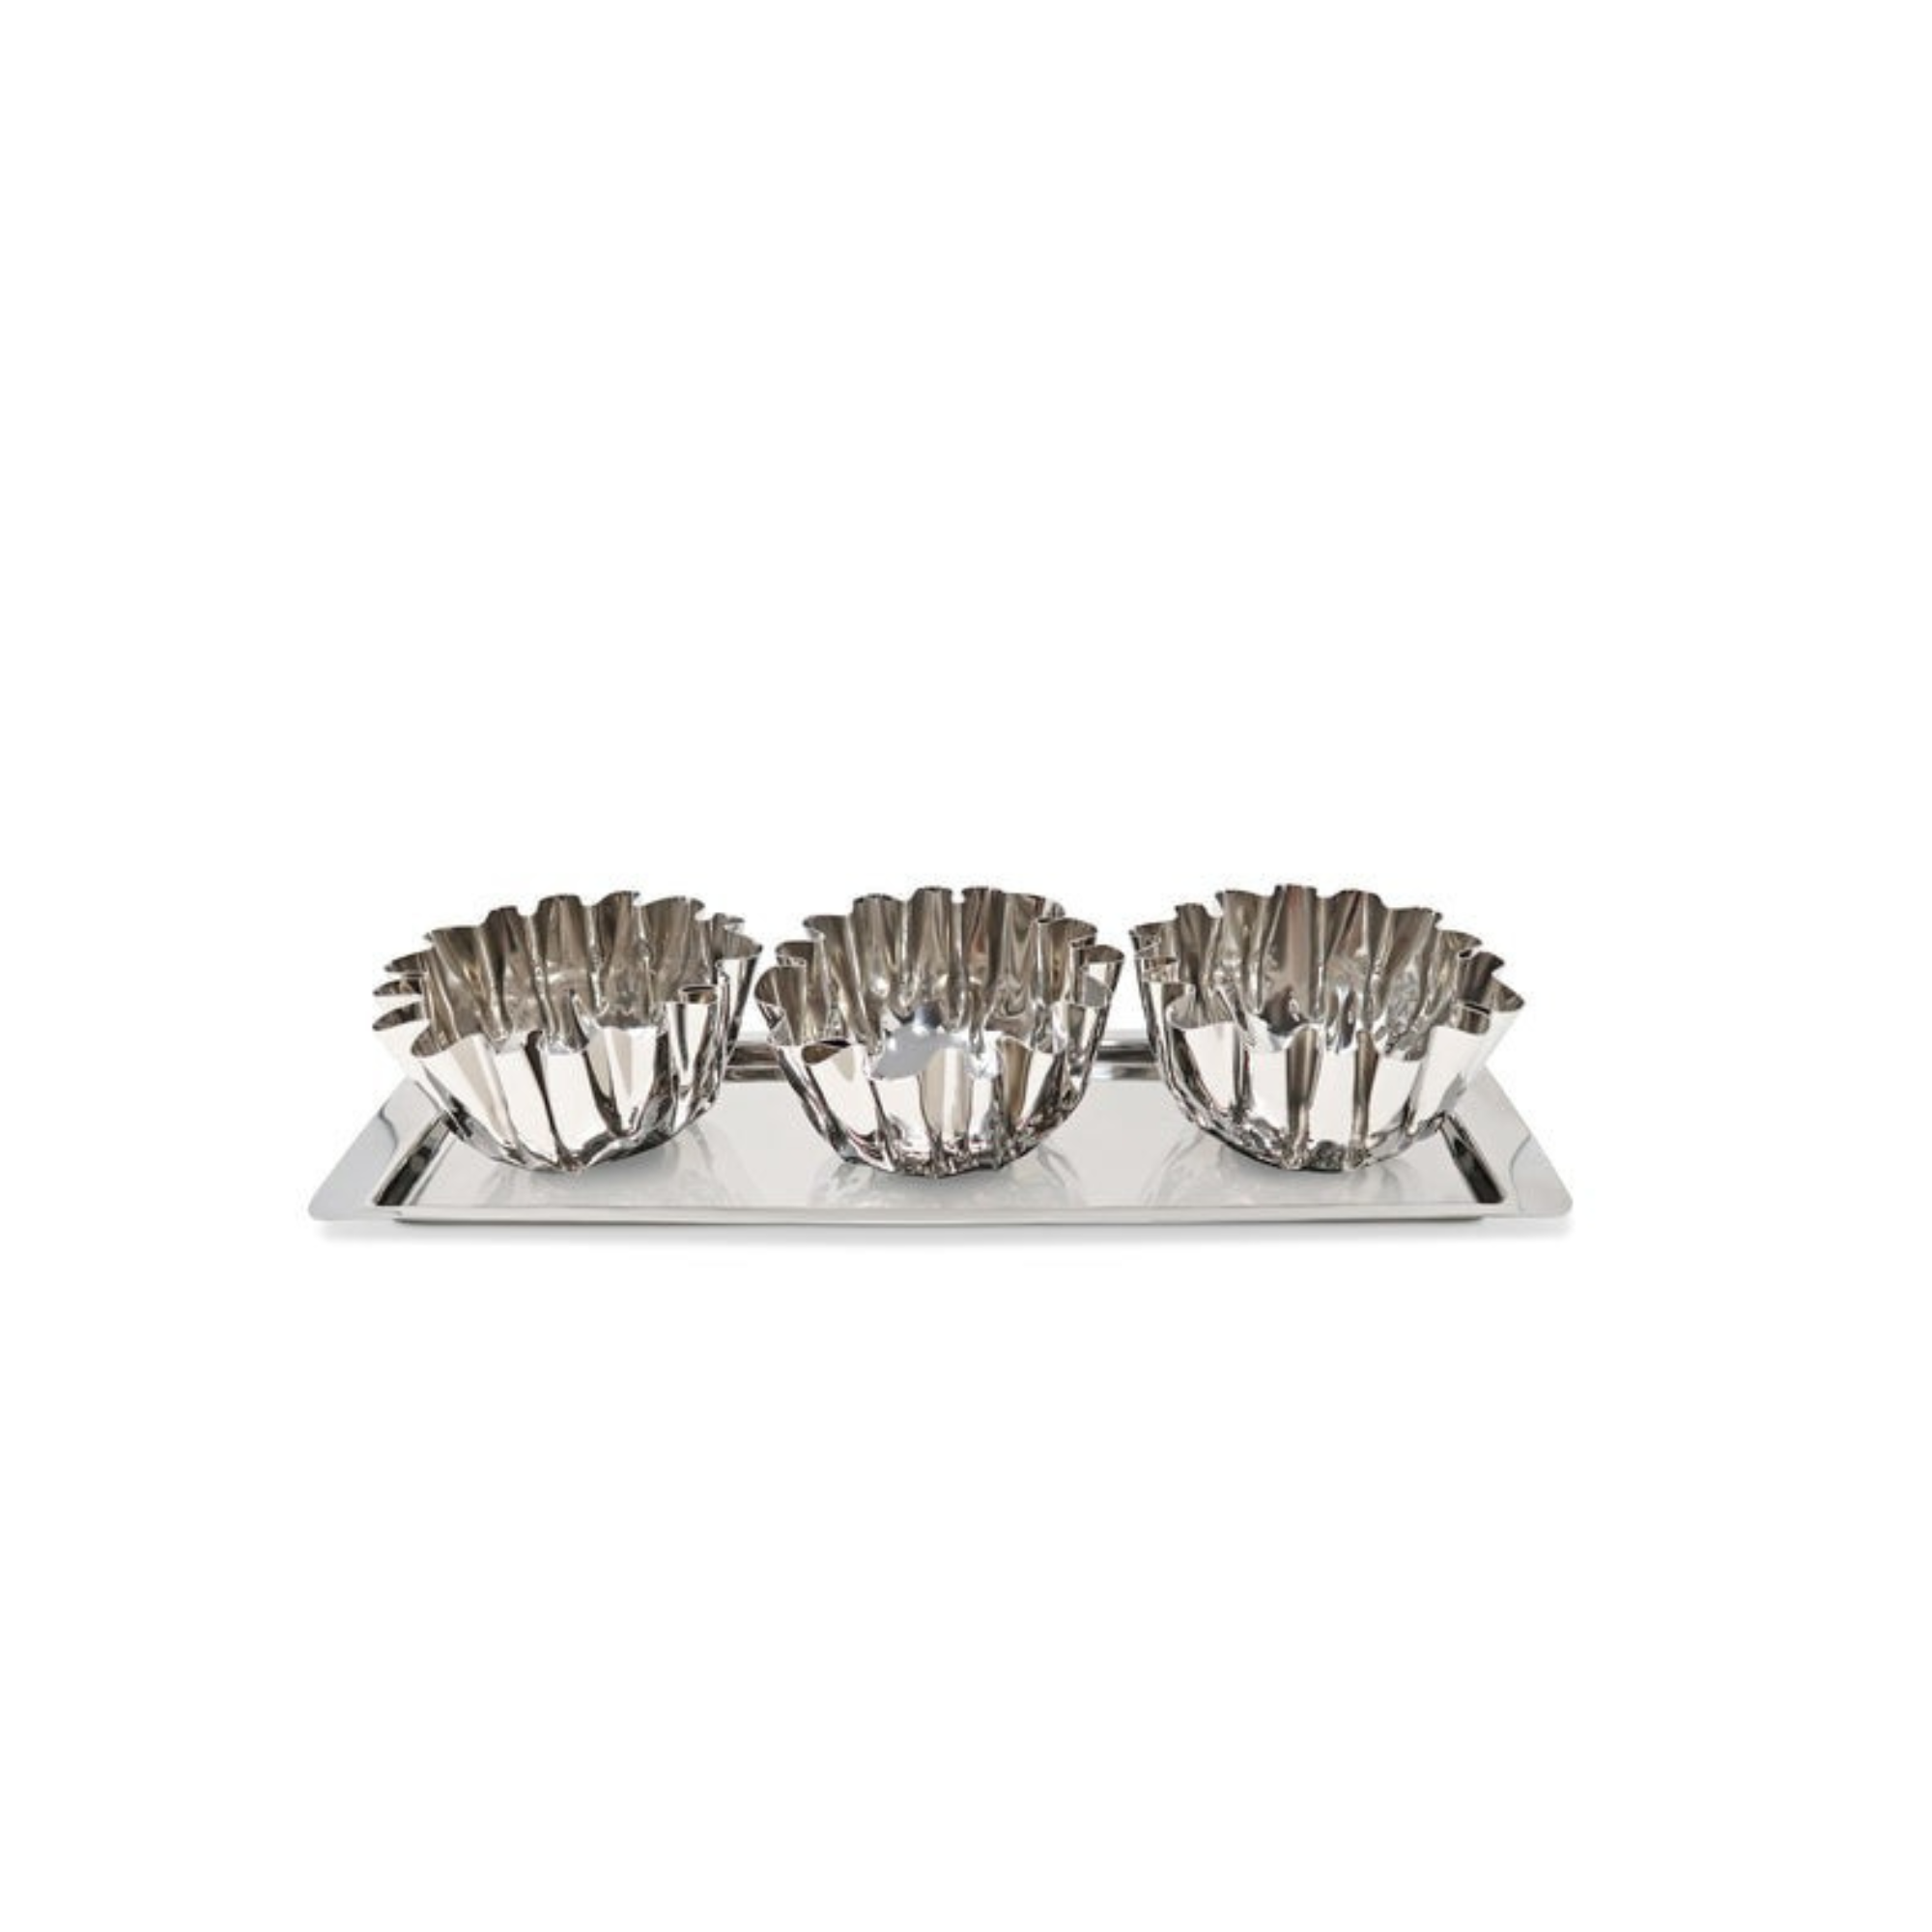 3 Bowl  Stainless Steel Relish Dish On Tray